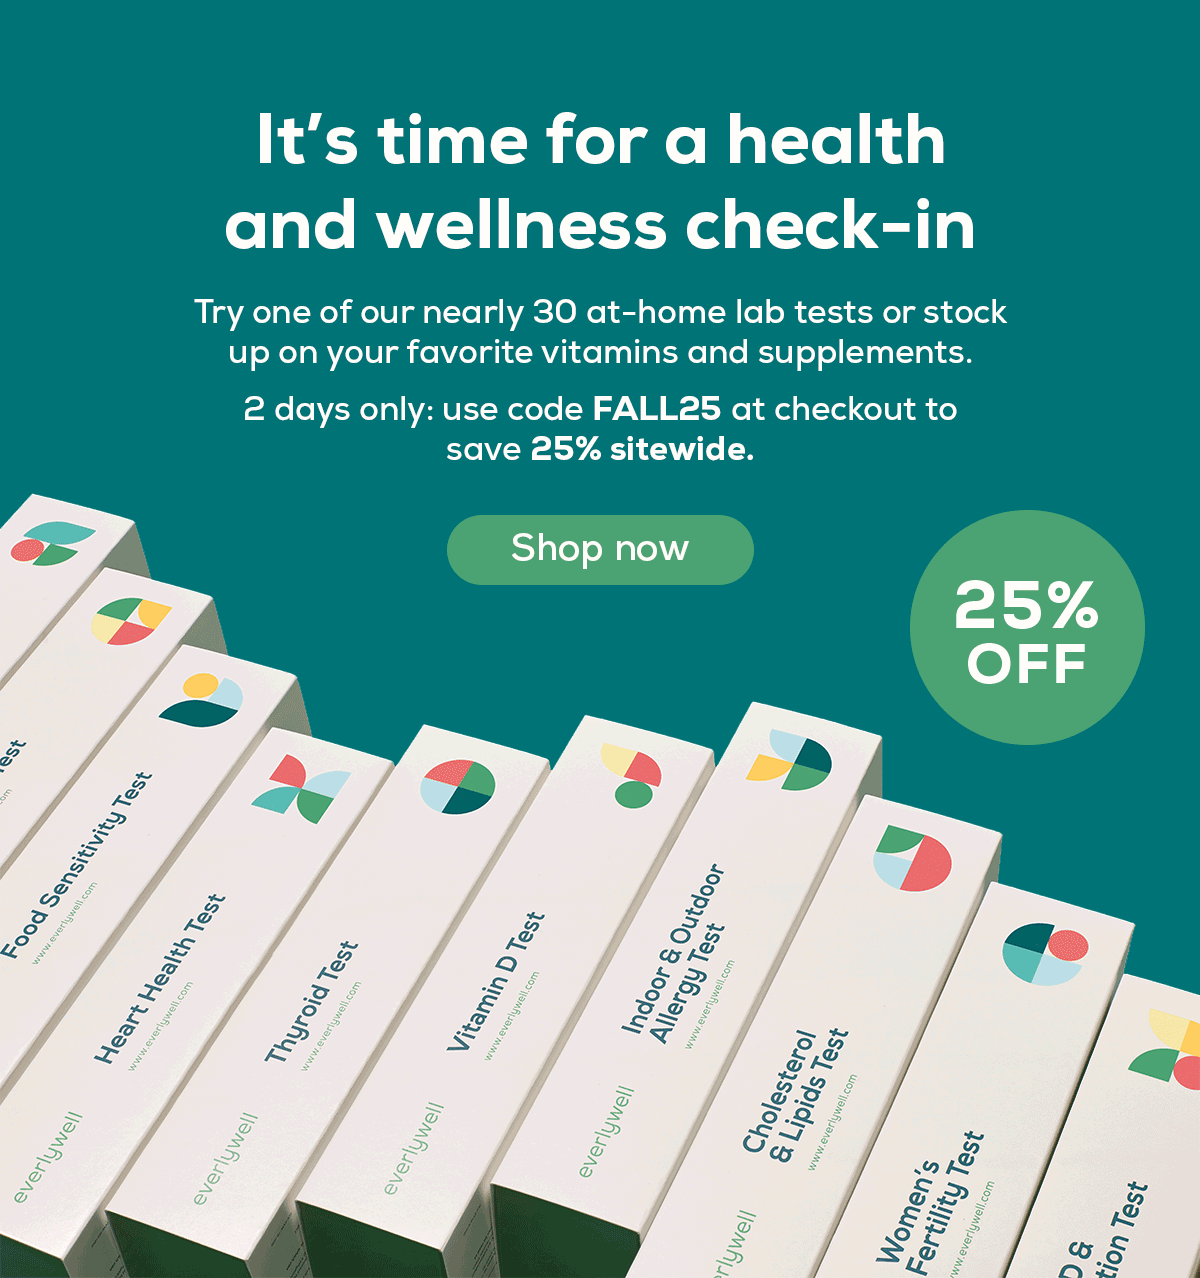 Try one of our nearly 30 at-home lab tests or stock up on your favorite vitamins and supplements. 2 days only: use code FALL25 at checkout to save 25% sitewide. | Shop now 